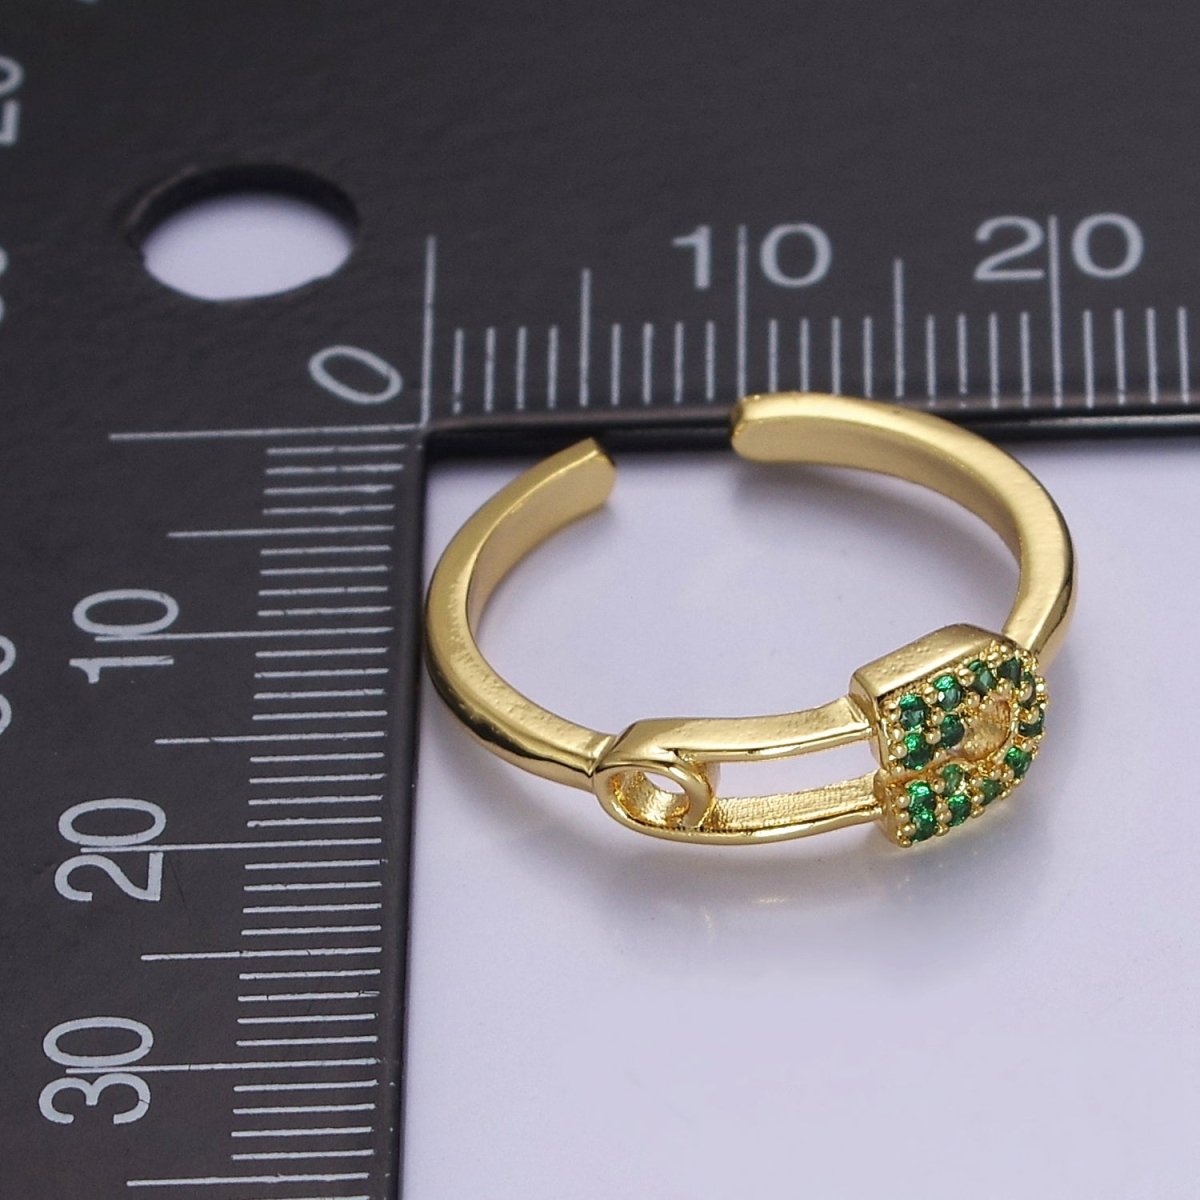 24k Gold Filled Tiny Safety Pin Ring | Emerald Green Micro Pave Dainty Ring O-2179 - DLUXCA